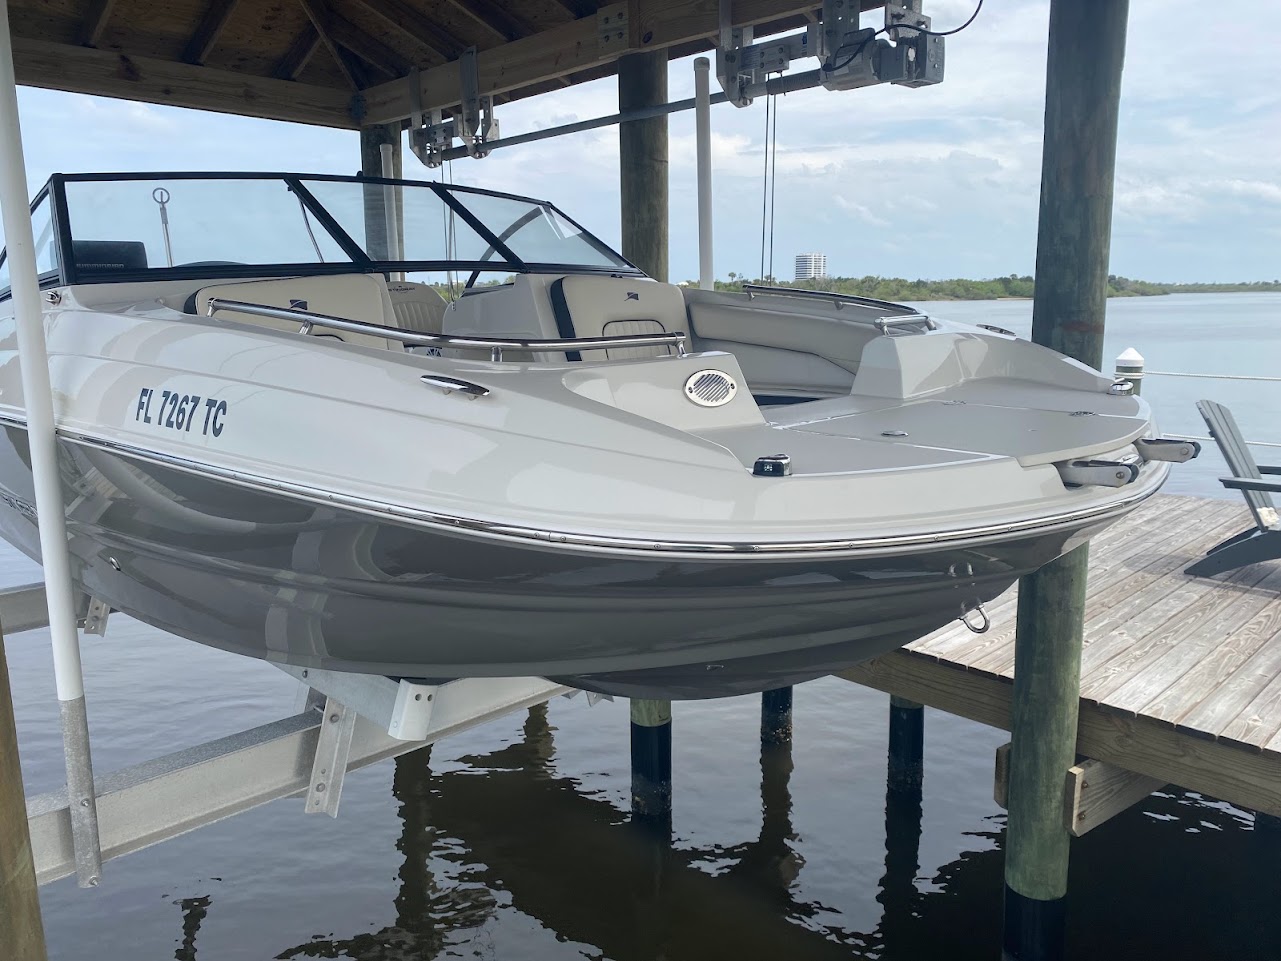 2022 Stingray 201DC Power boat for sale in Palm Coast, FL - image 4 